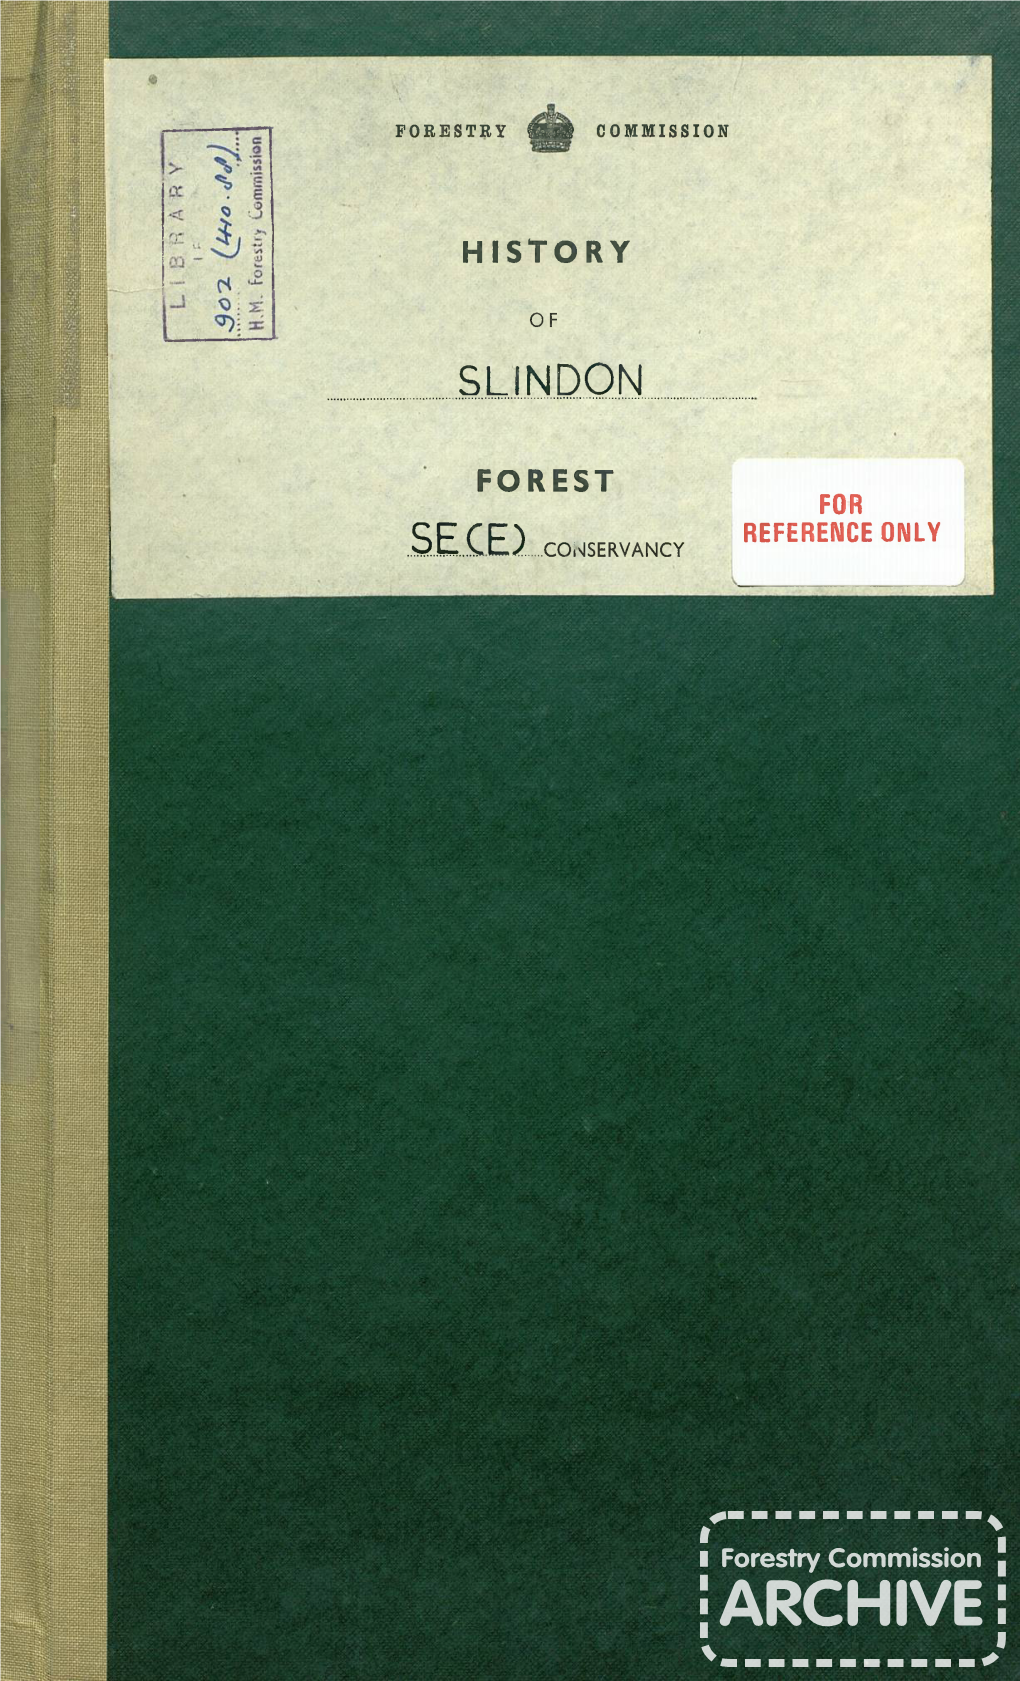 History of Slindon Forest 1938-1951. South East